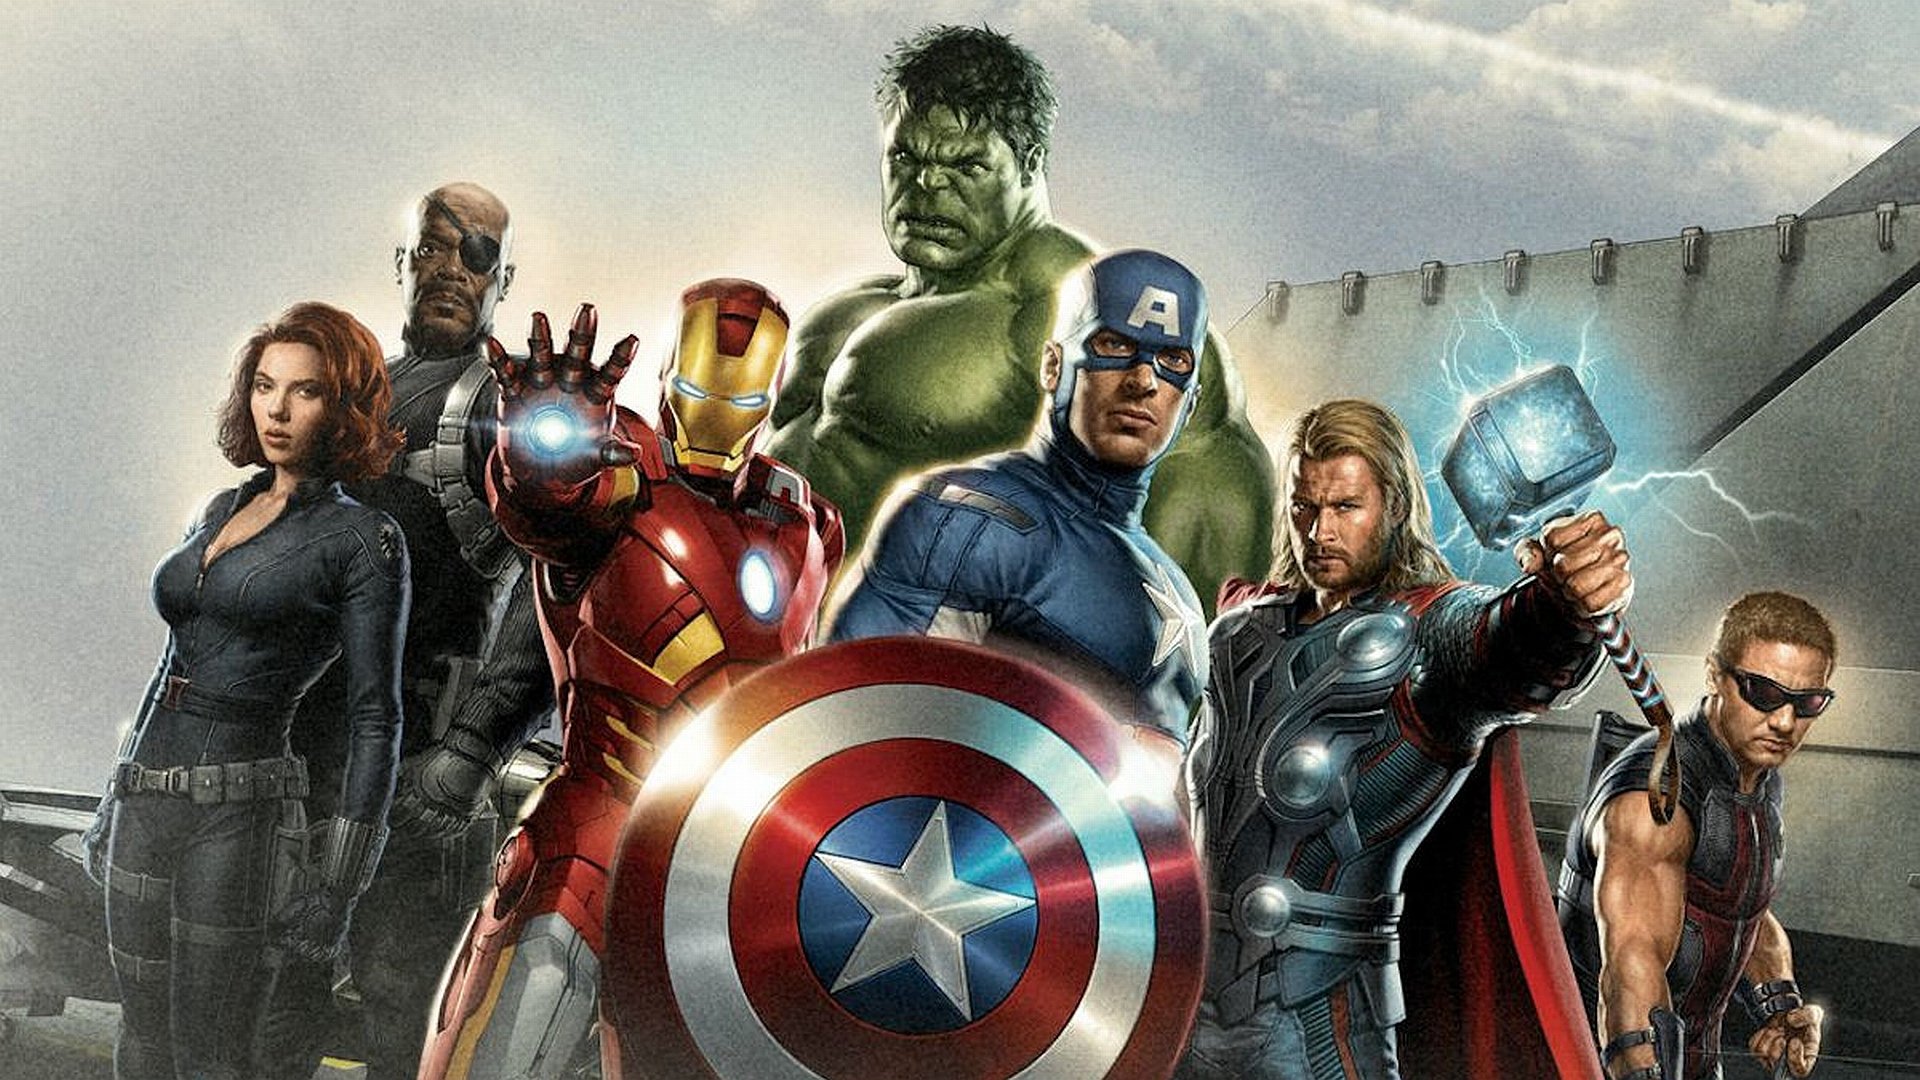 Avengers Full HD Wallpaper And Background Image 1920x1080 ID